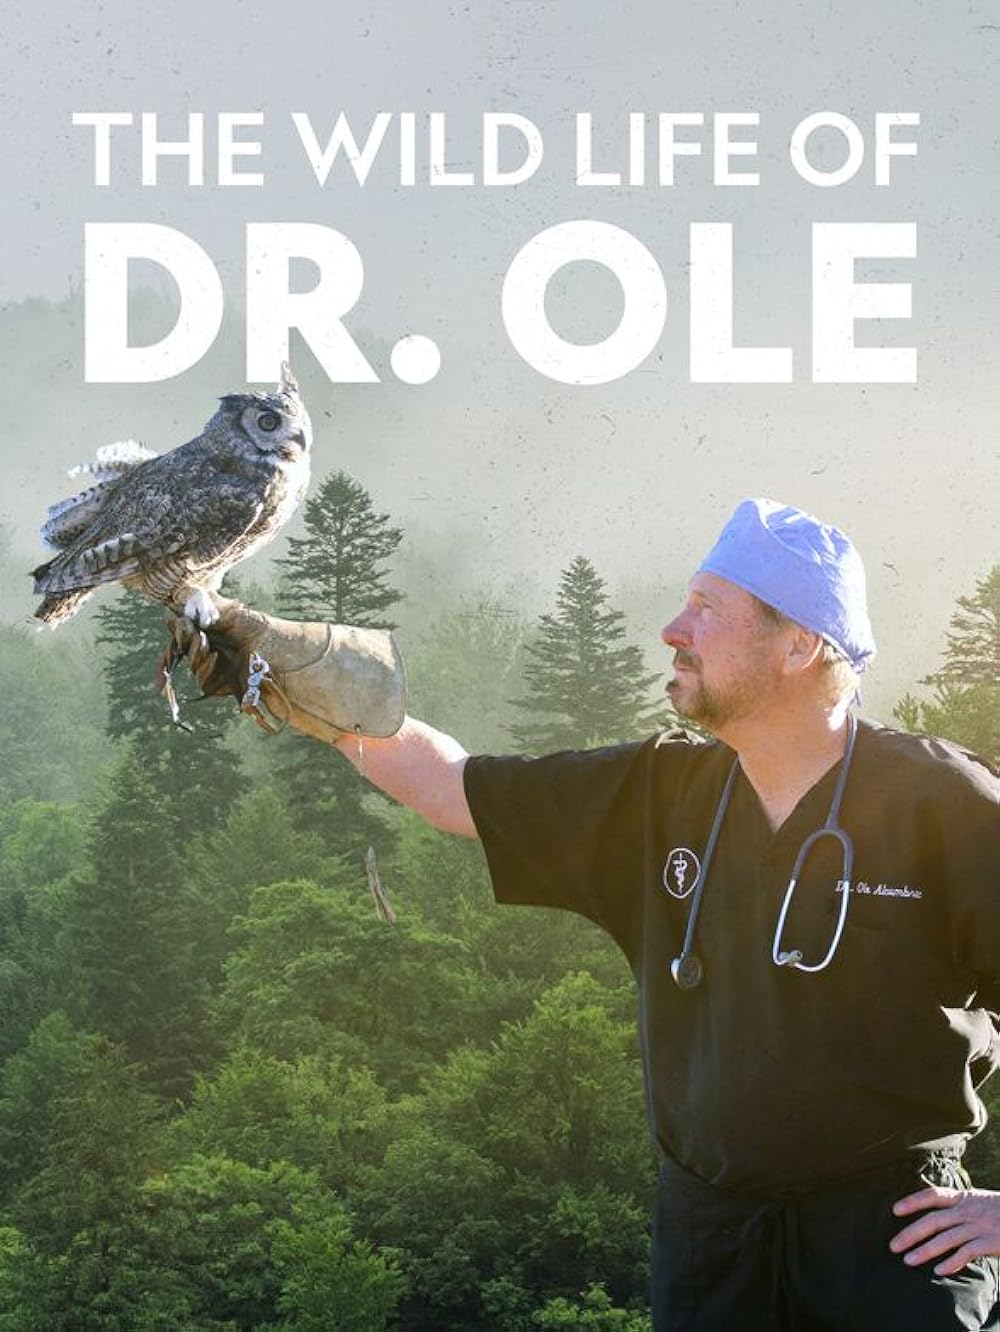 The Wild Life of Dr. Ole